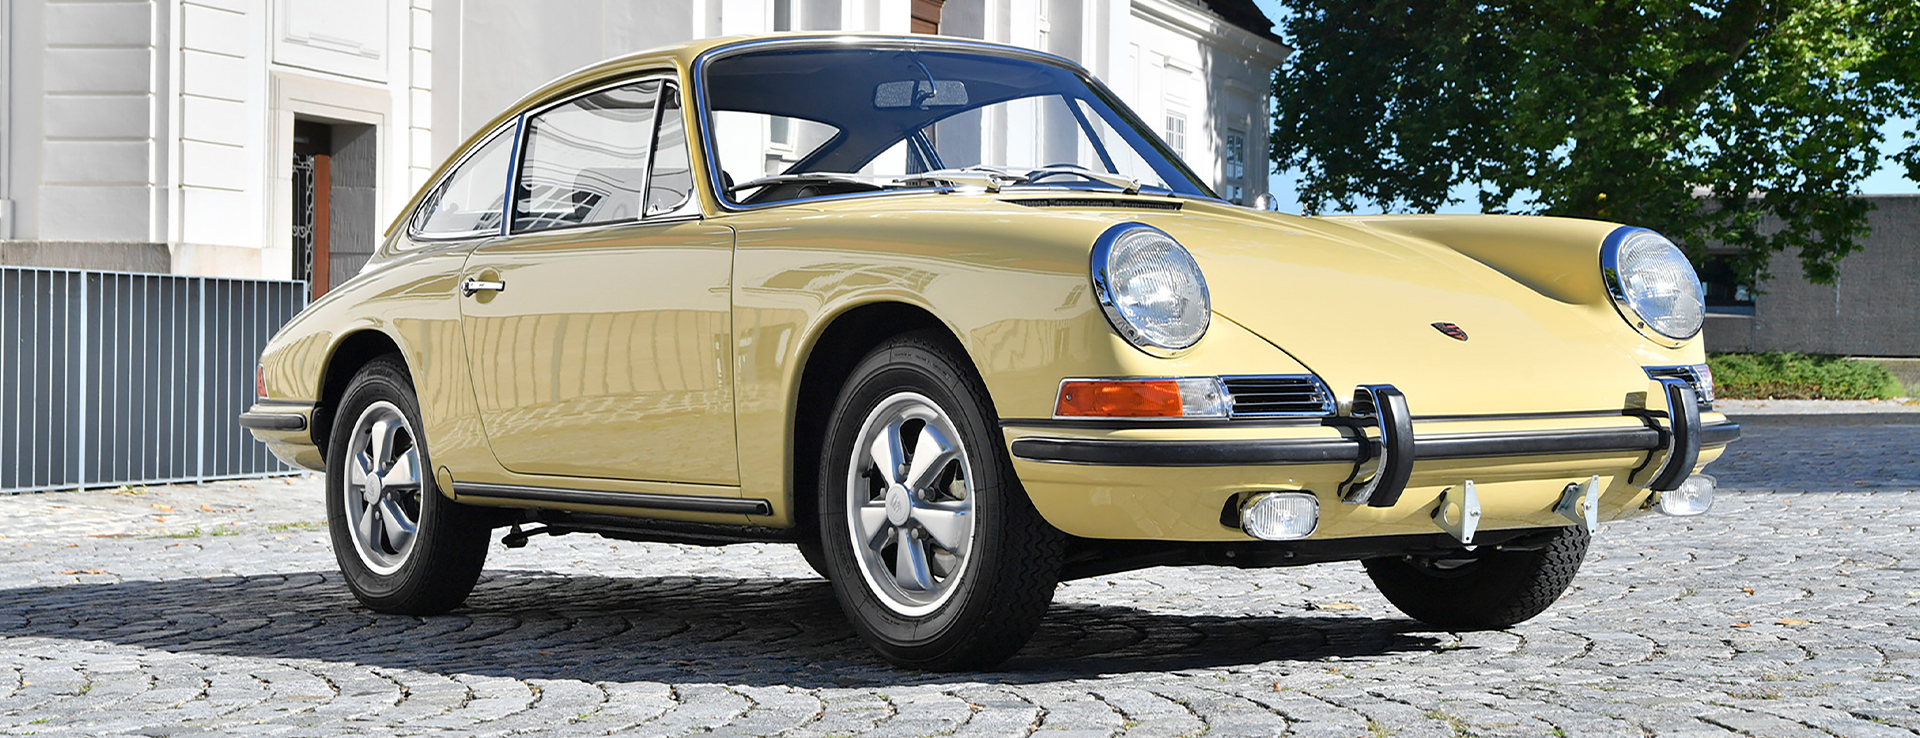 Classic Porsche 901 in yellow in country lane